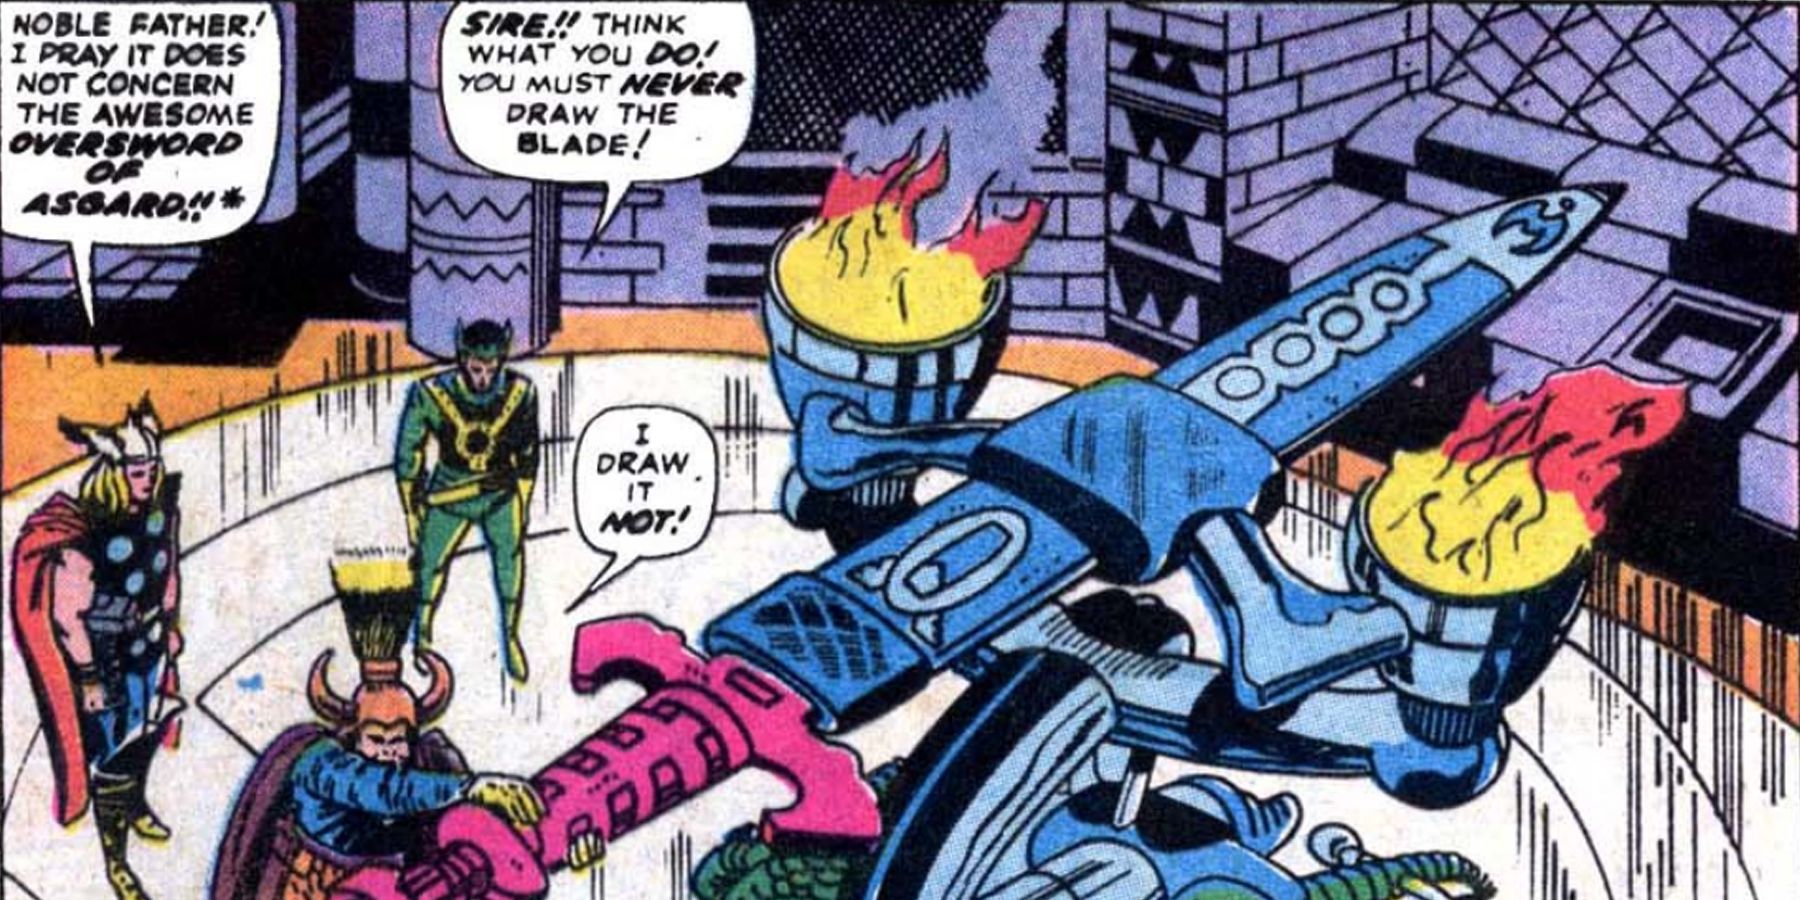 The Odinsword being loaded on a machine in marvel comics